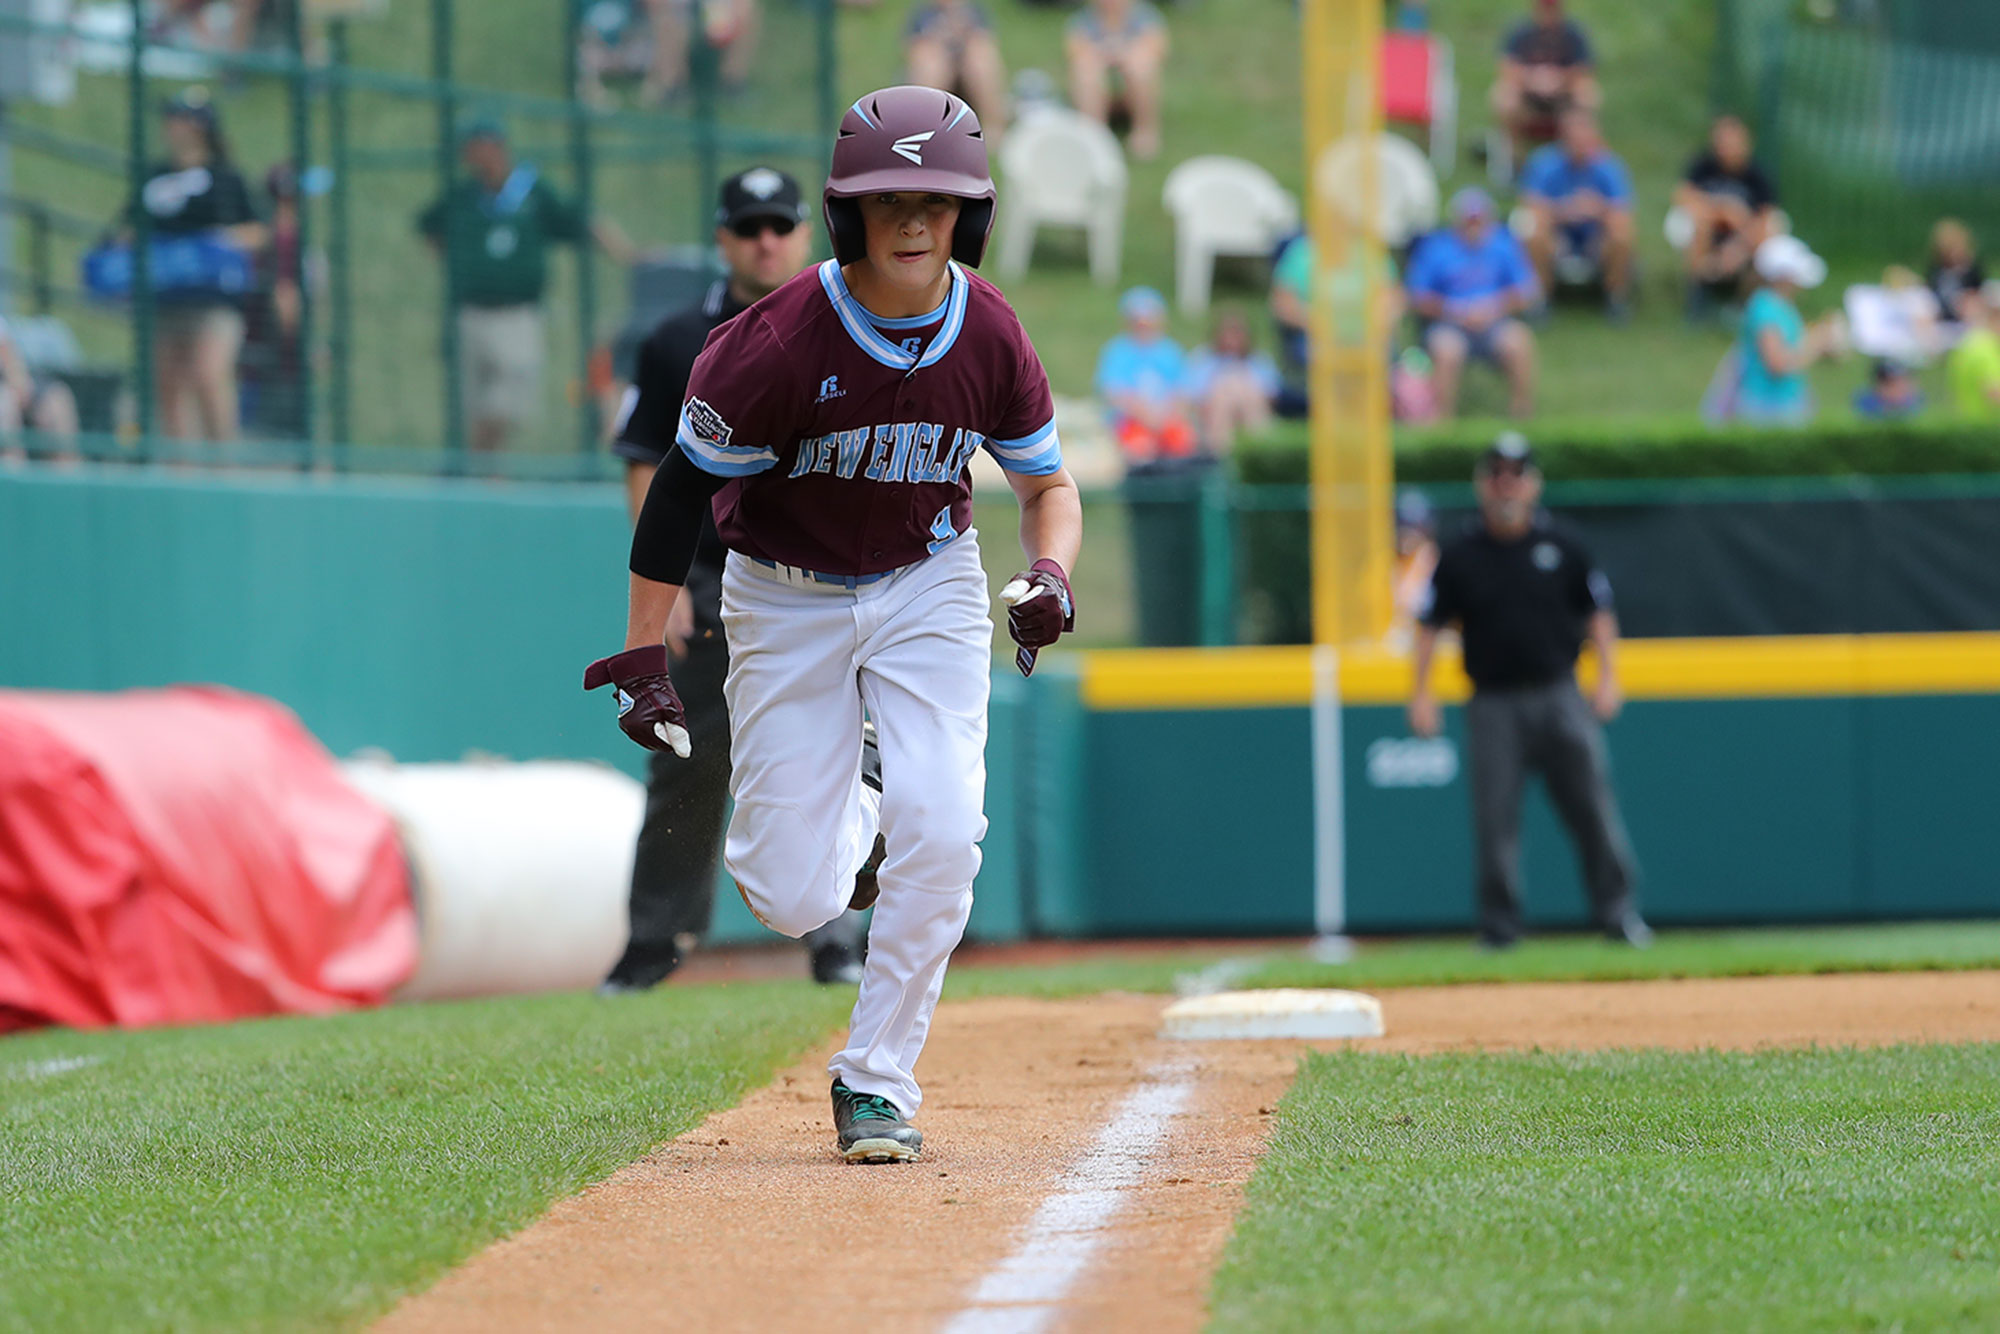 R.I. is one game away from the Little League Baseball World Series